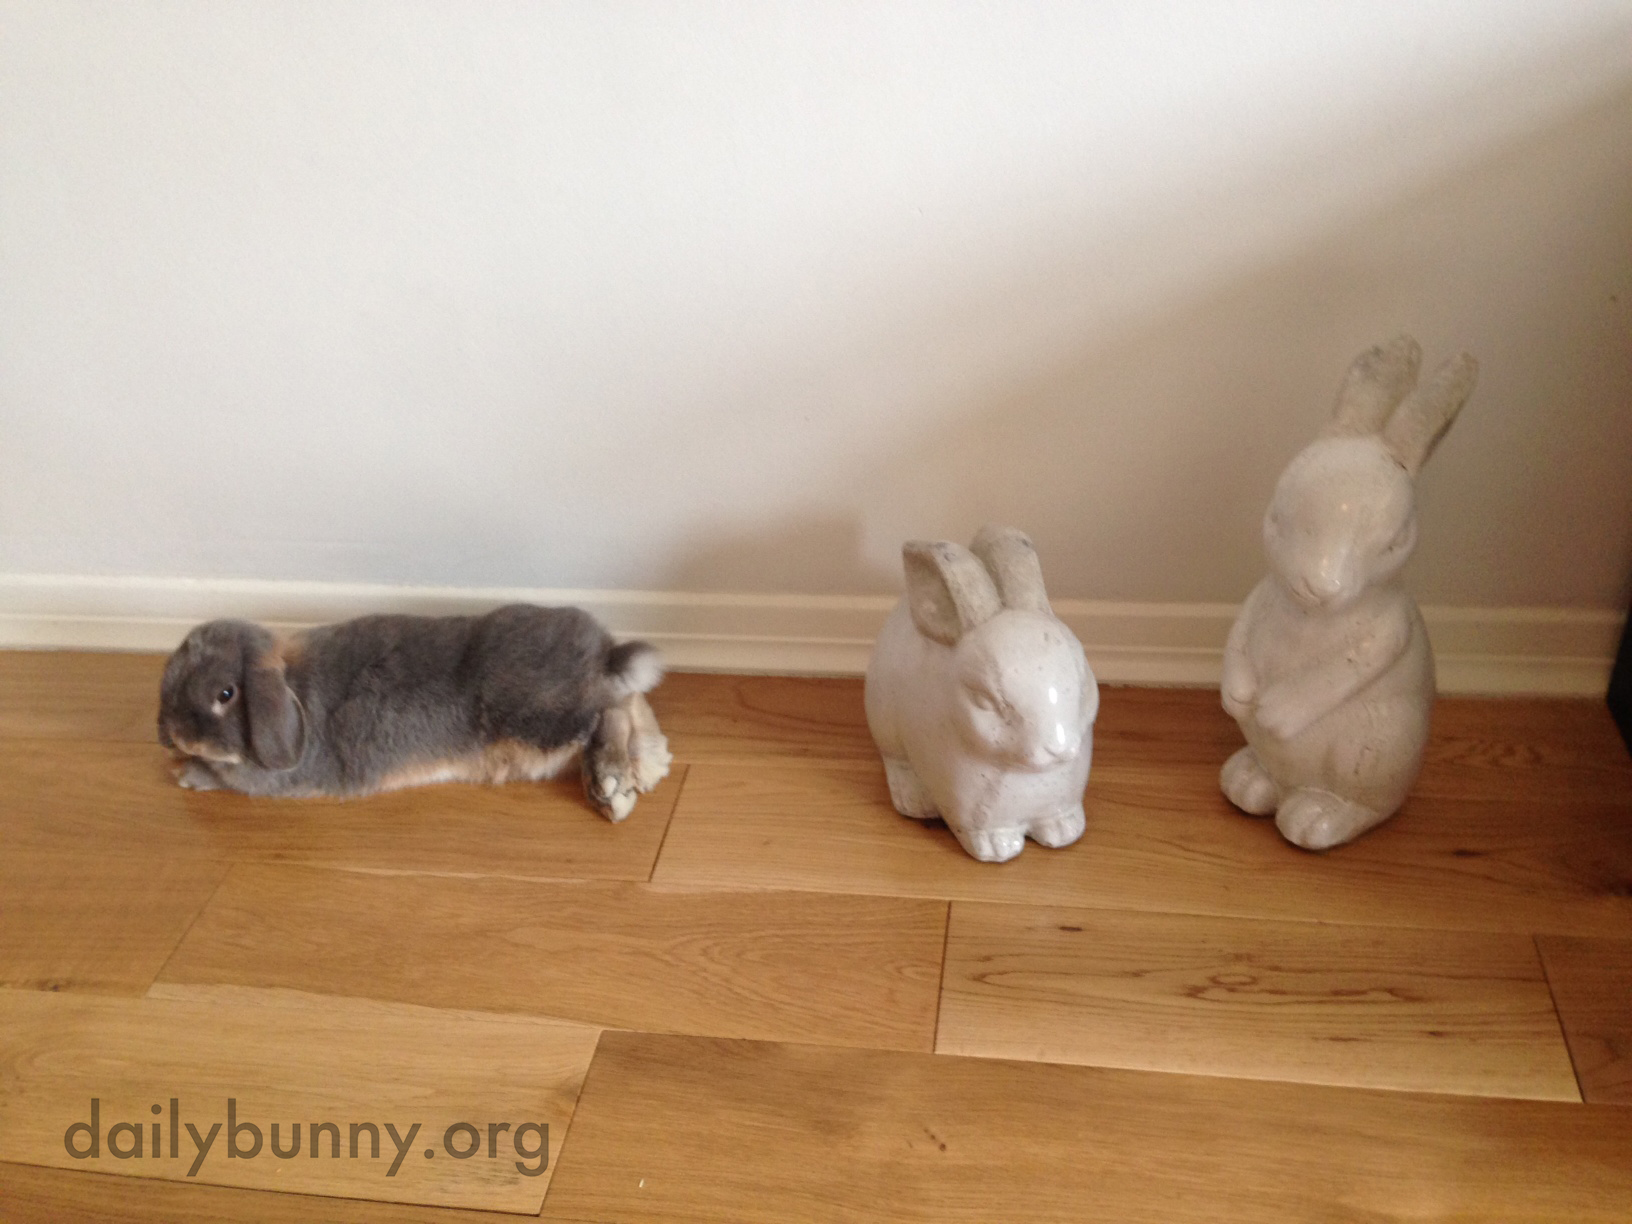 Can't a Grumpy Bunny Just Lie Down without a Human Ooh-ing and Aww-ing and Taking Pictures? 4